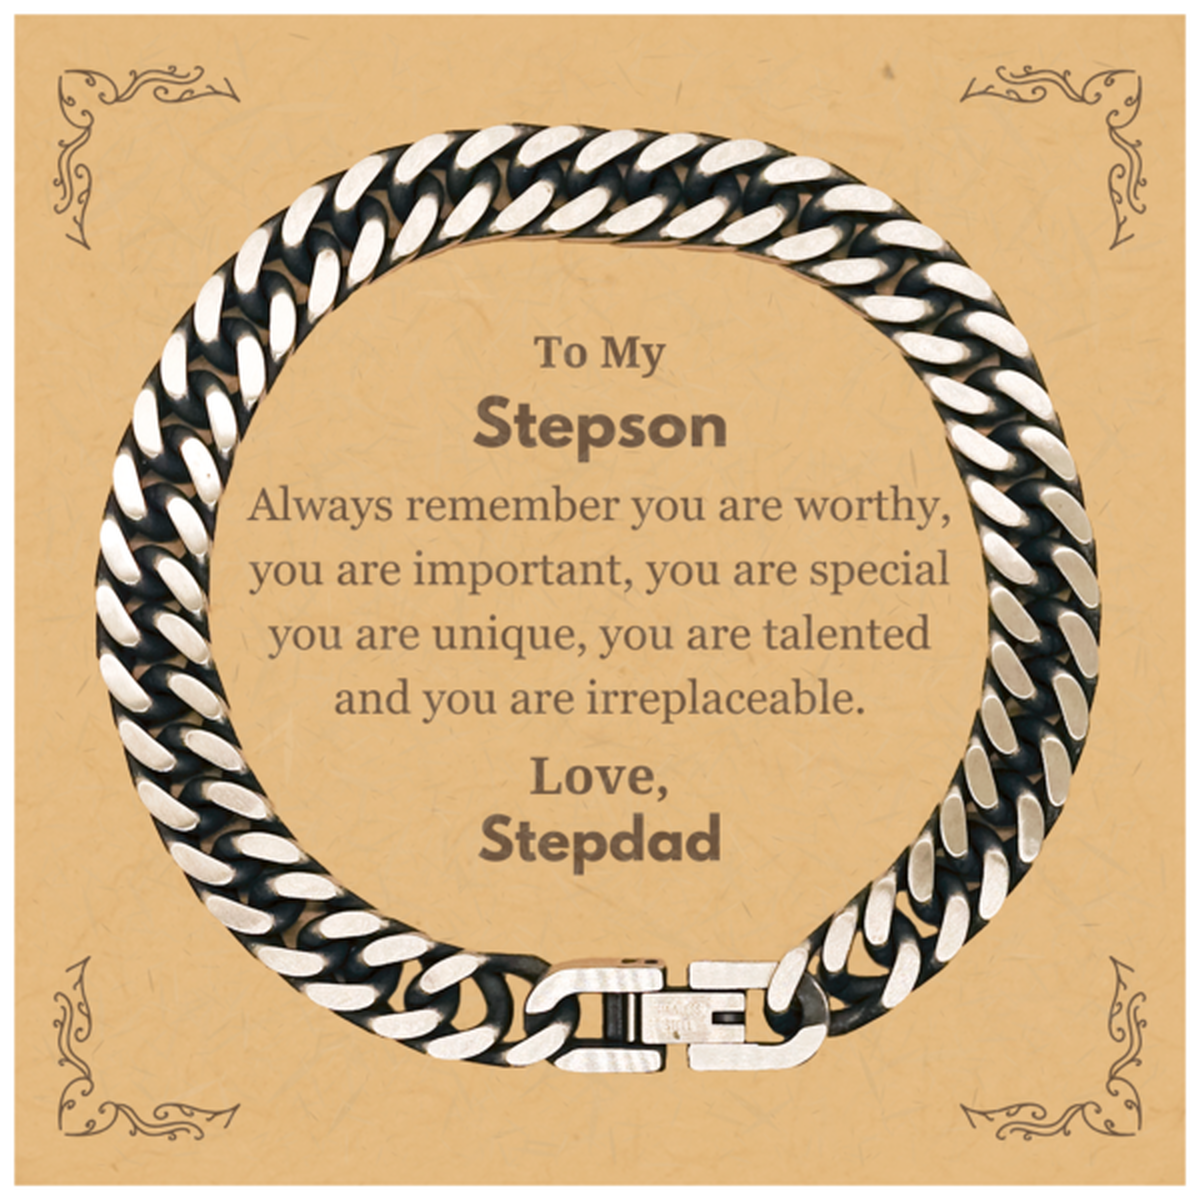 Stepson Birthday Gifts from Stepdad, Inspirational Cuban Link Chain Bracelet for Stepson Christmas Graduation Gifts for Stepson Always remember you are worthy, you are important. Love, Stepdad